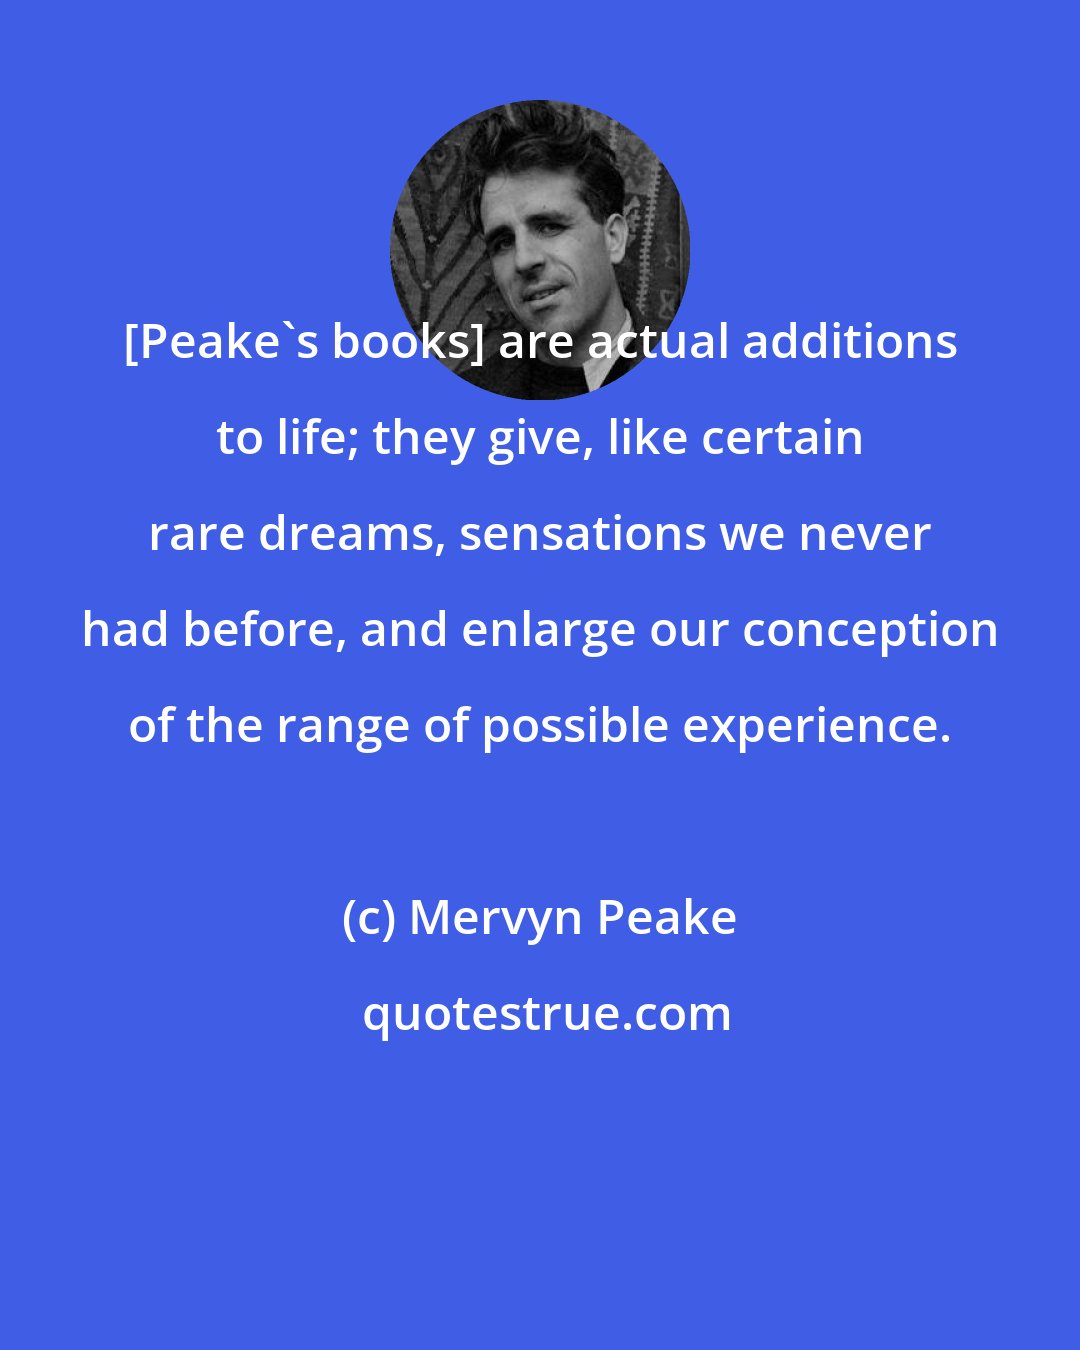 Mervyn Peake: [Peake's books] are actual additions to life; they give, like certain rare dreams, sensations we never had before, and enlarge our conception of the range of possible experience.